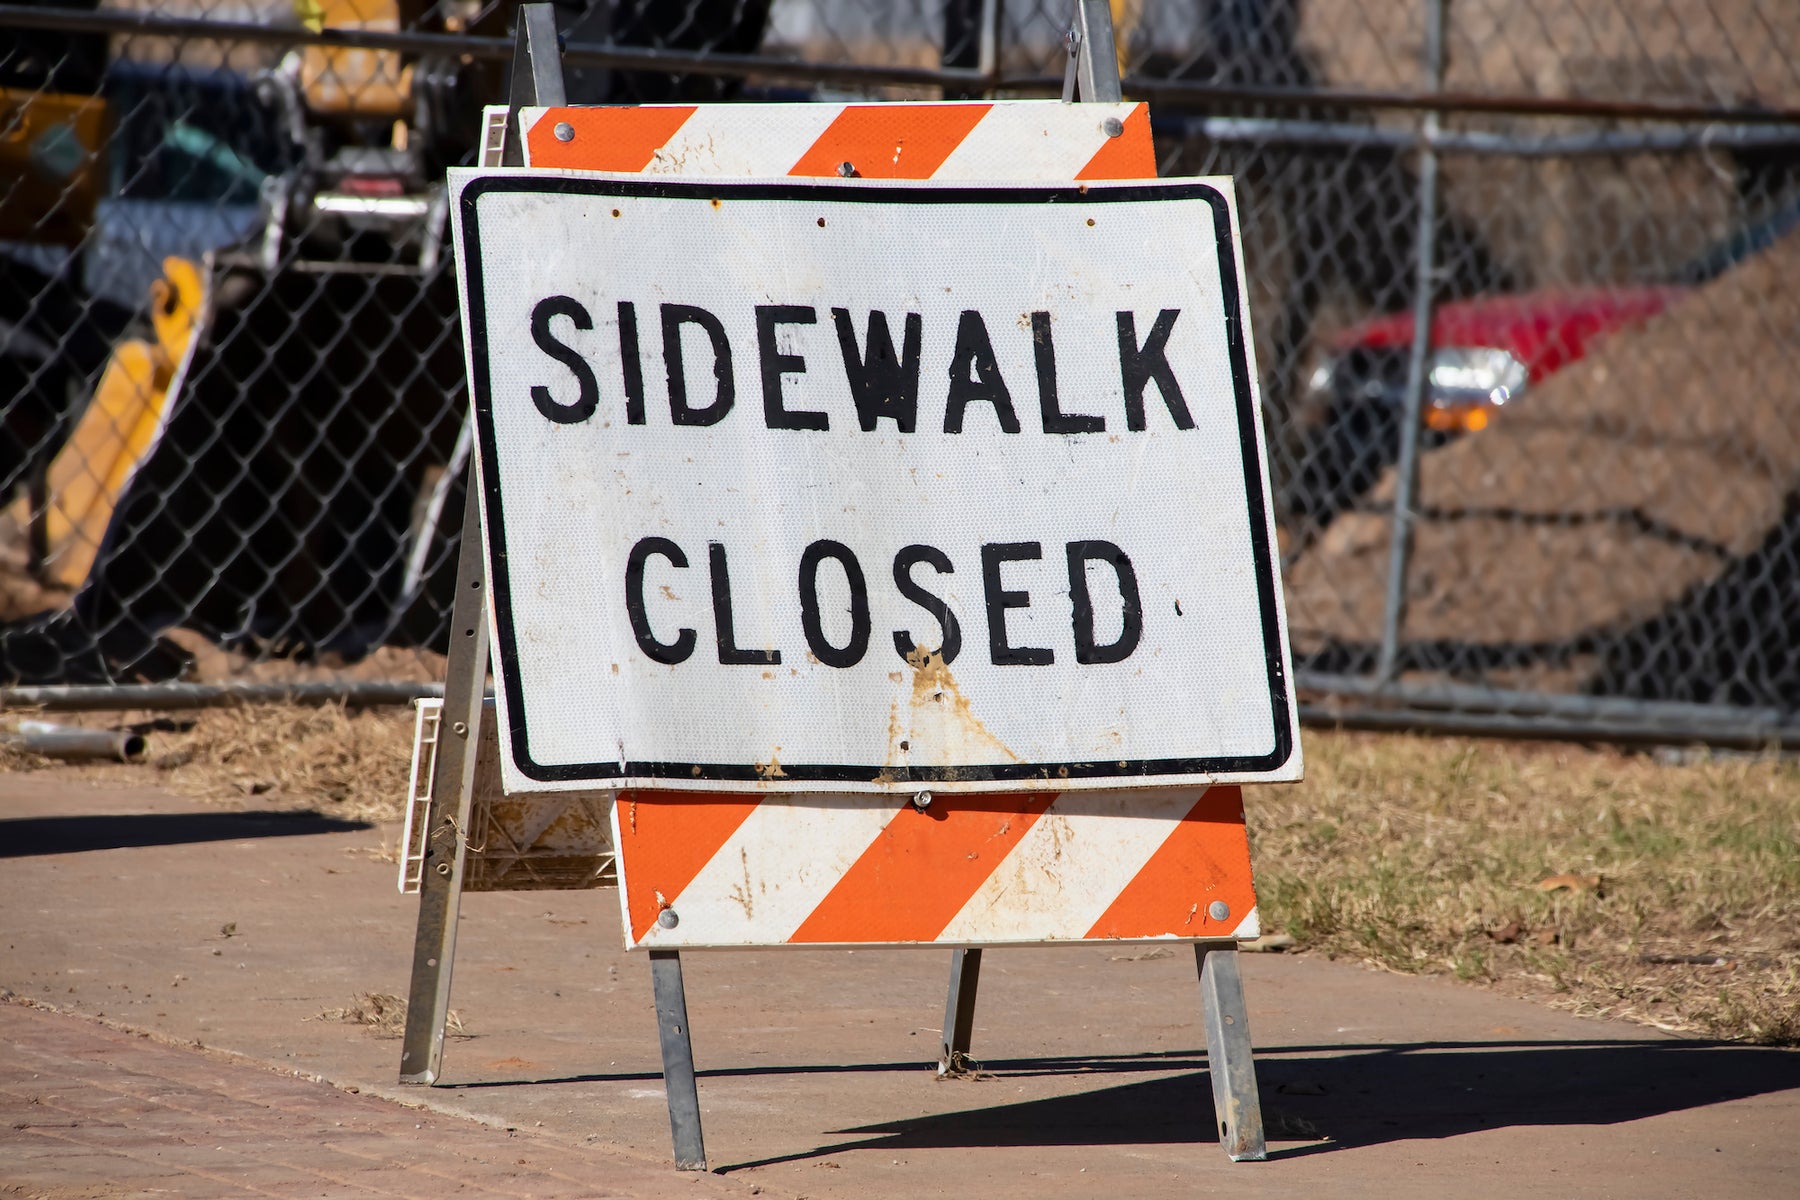 How to Use Sidewalk Closed Signs to Direct Pedestrian Traffic